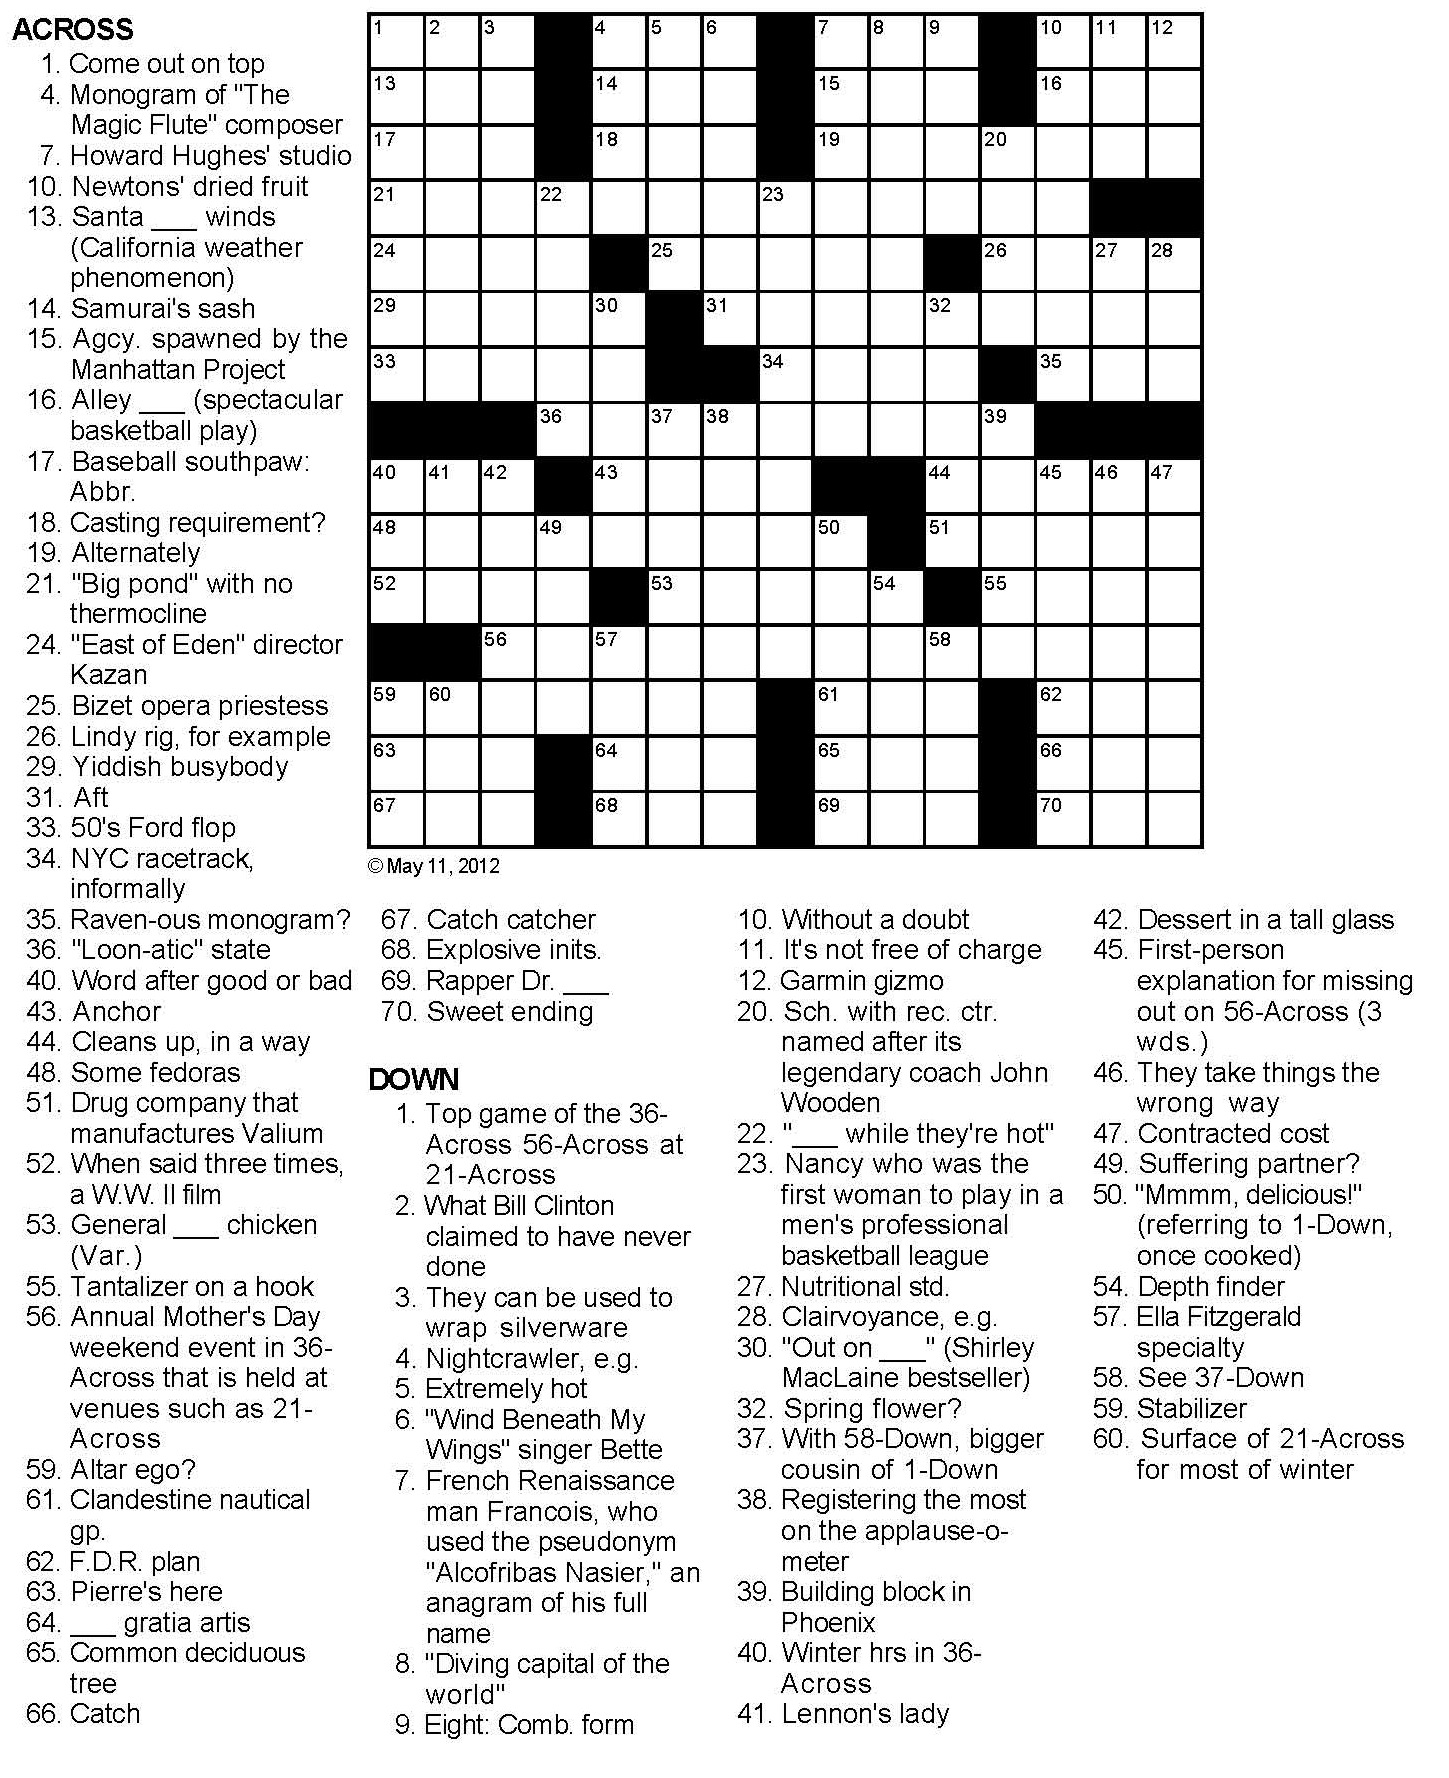 online-crossword-puzzles-printable-customize-and-print